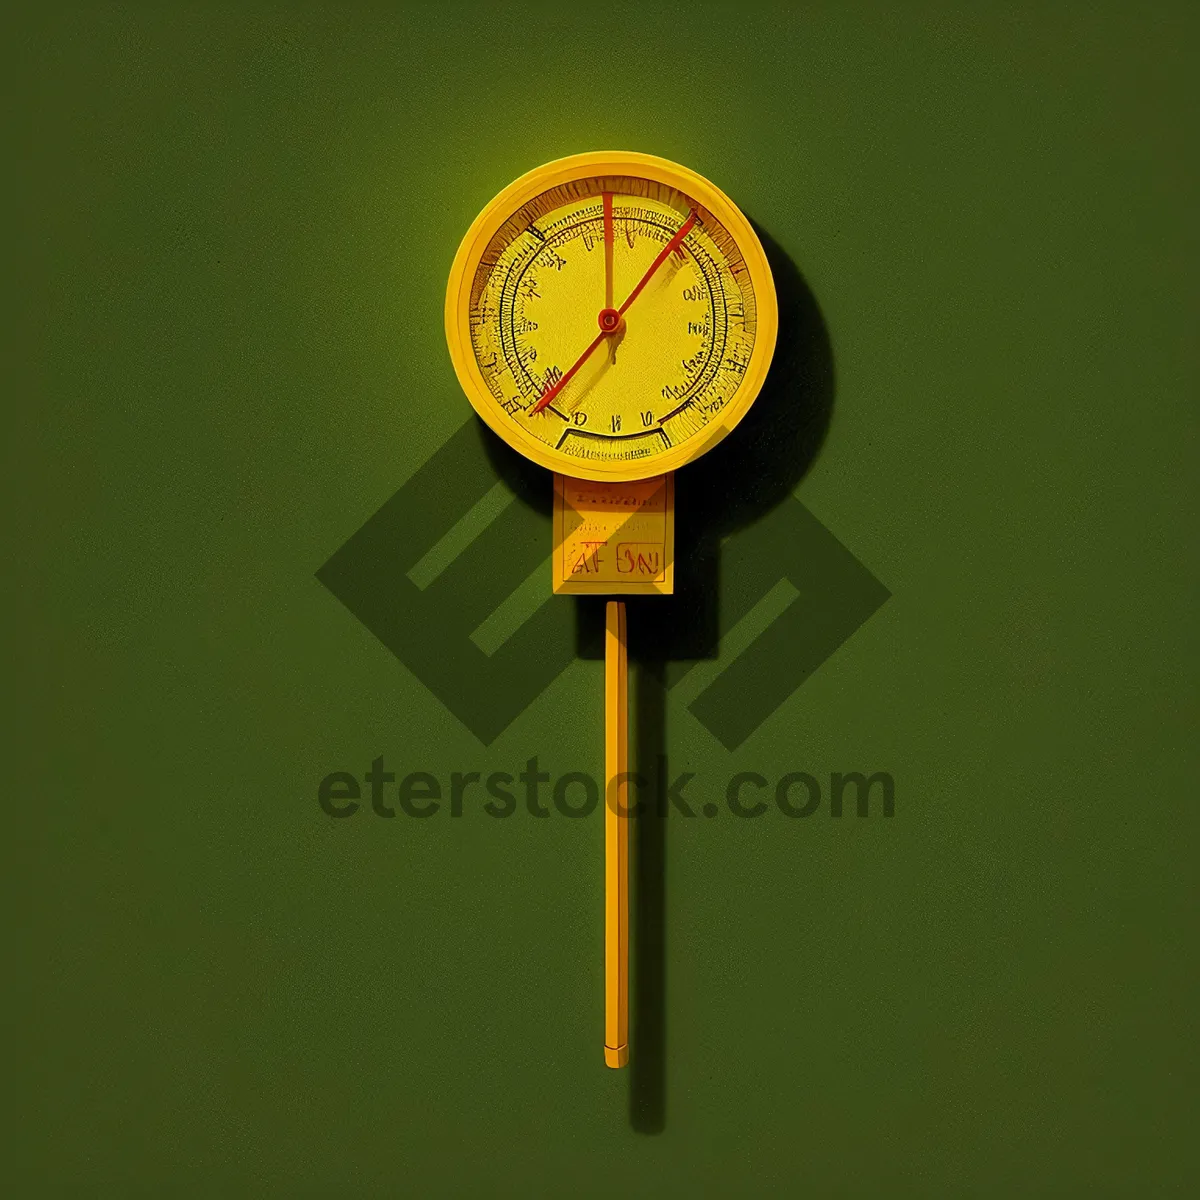 Picture of Analog Wall Clock with Time Indicator.